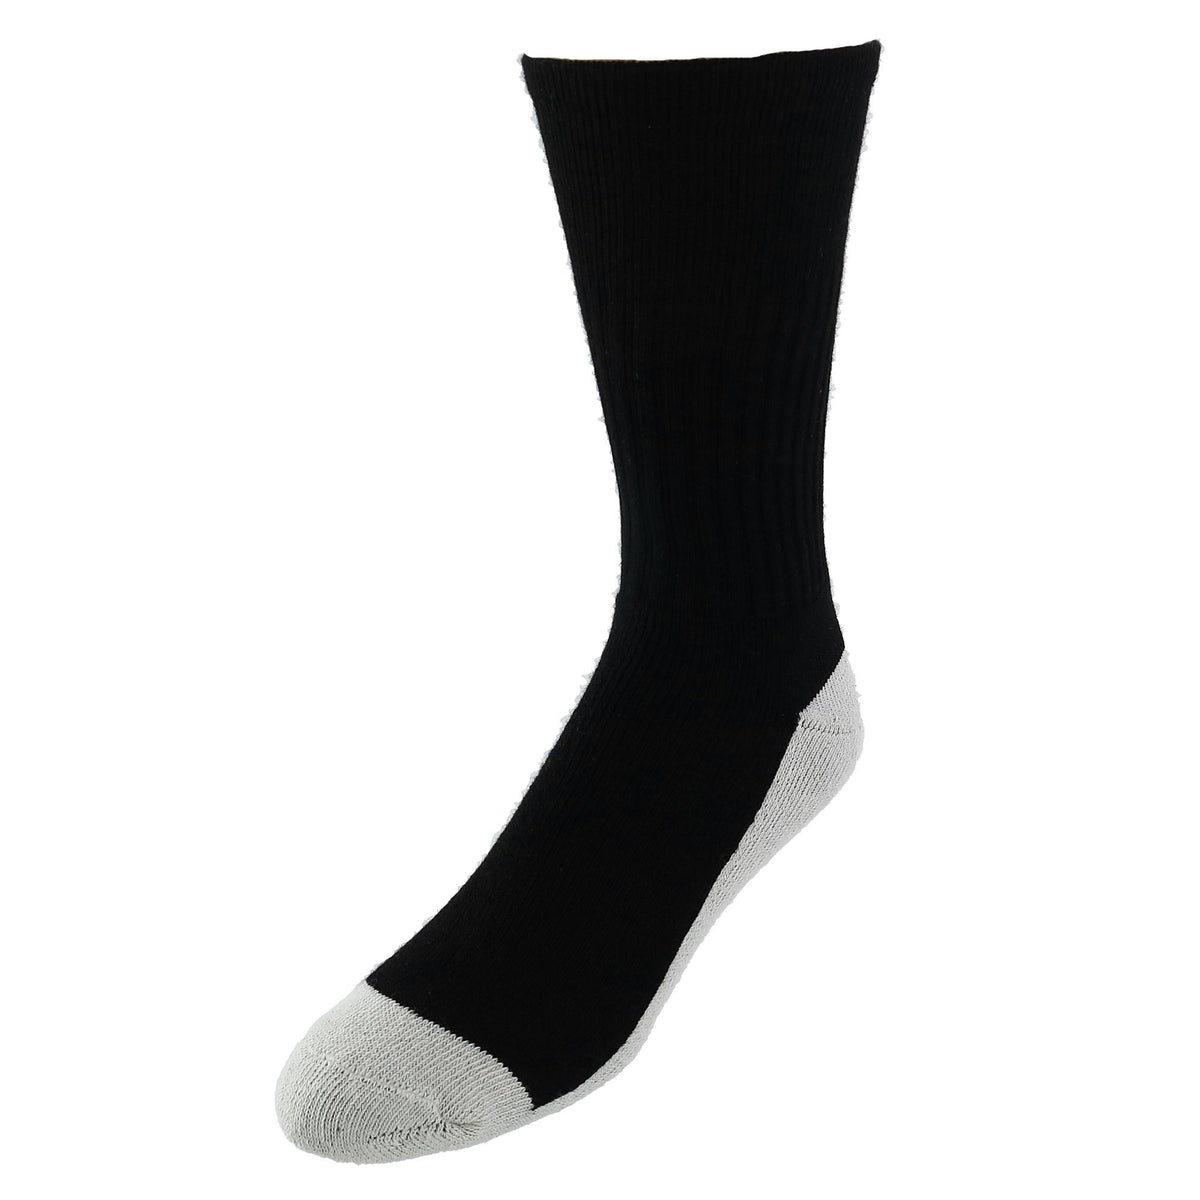 Men's Athletic Health Crew Cotton Blend Socks (3 Pair Pack) by Pro Feet ...